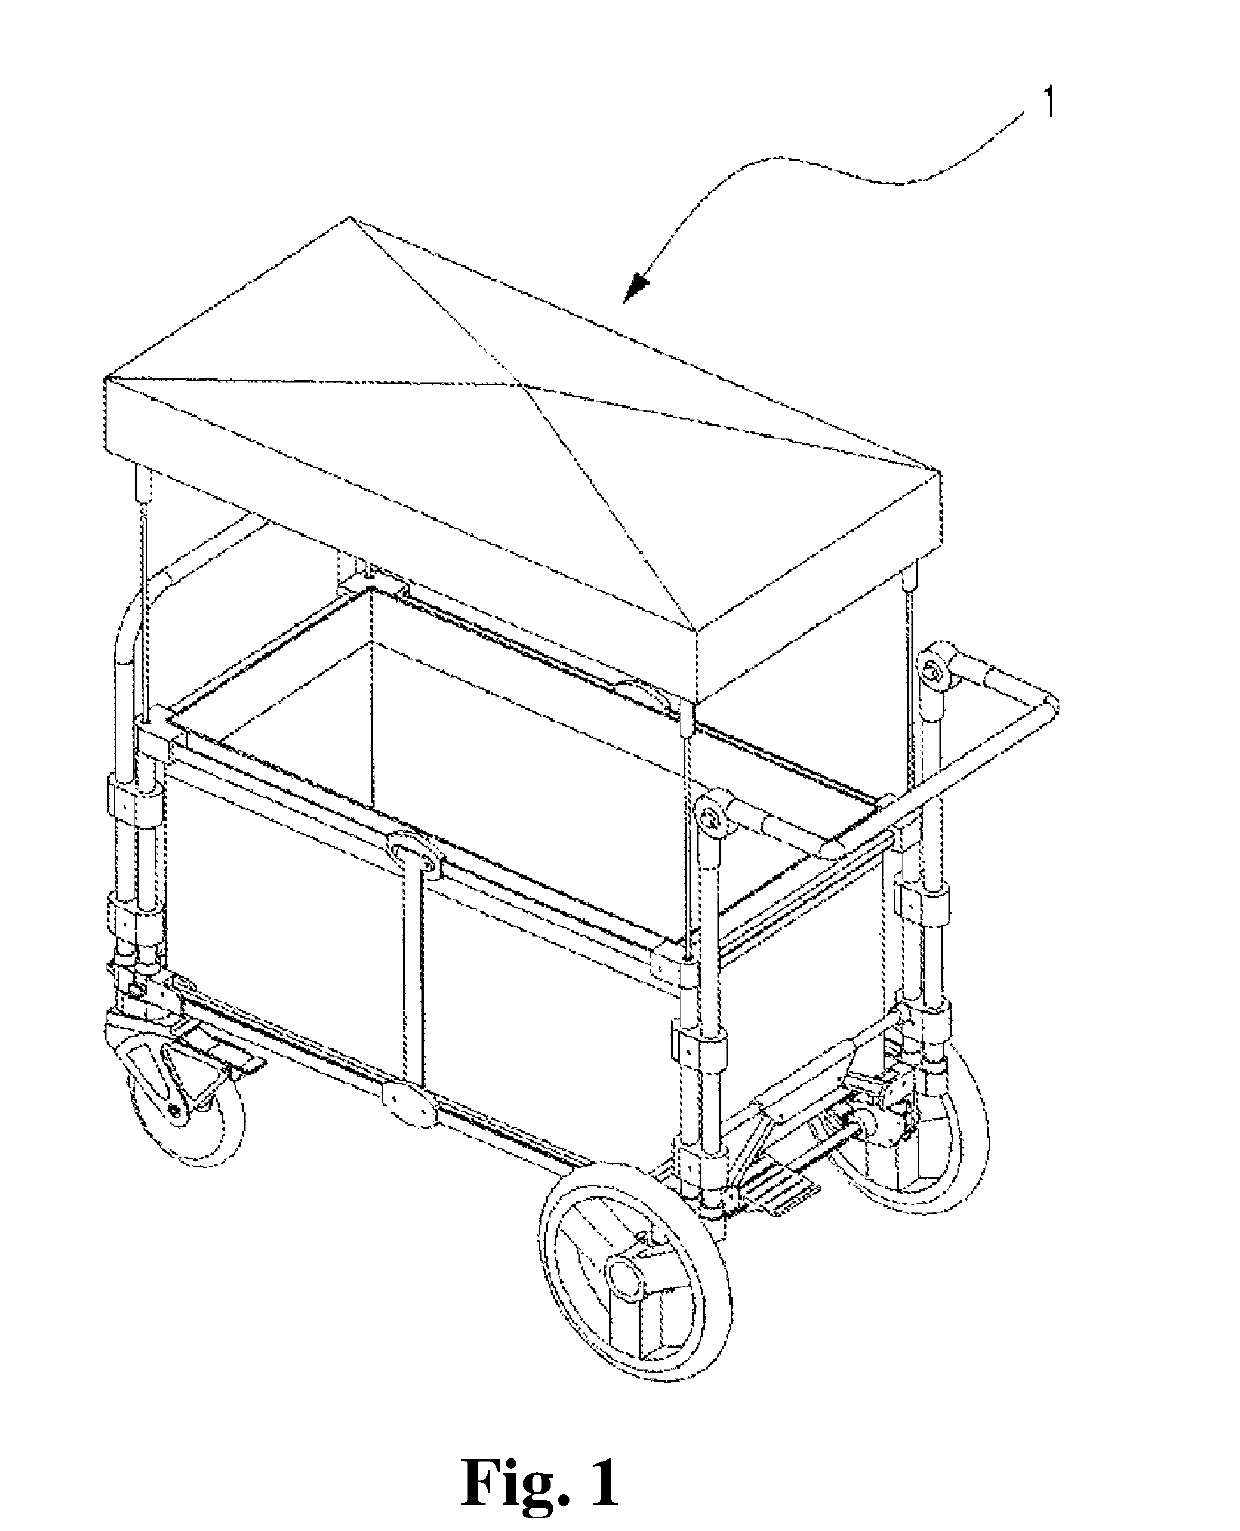 Infant wagon having improved convenience of use